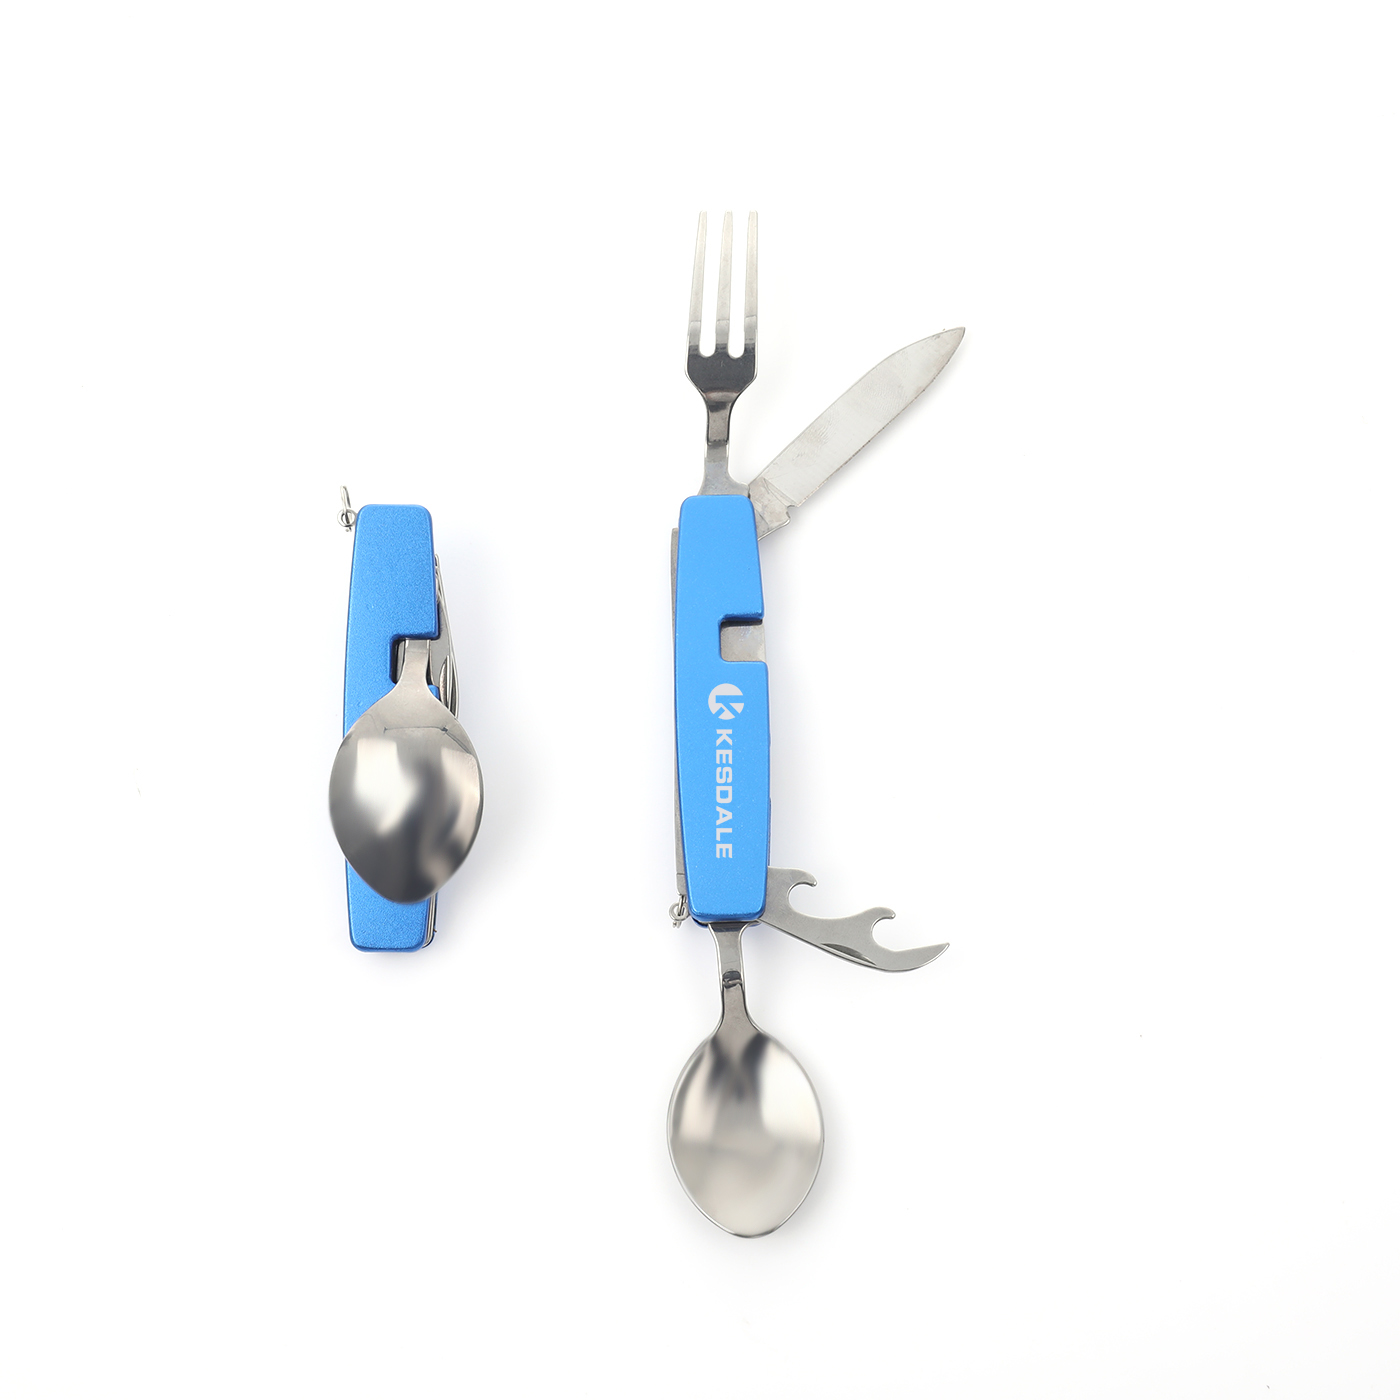 Detachable Stainless Steel Camping Cutlery Kit